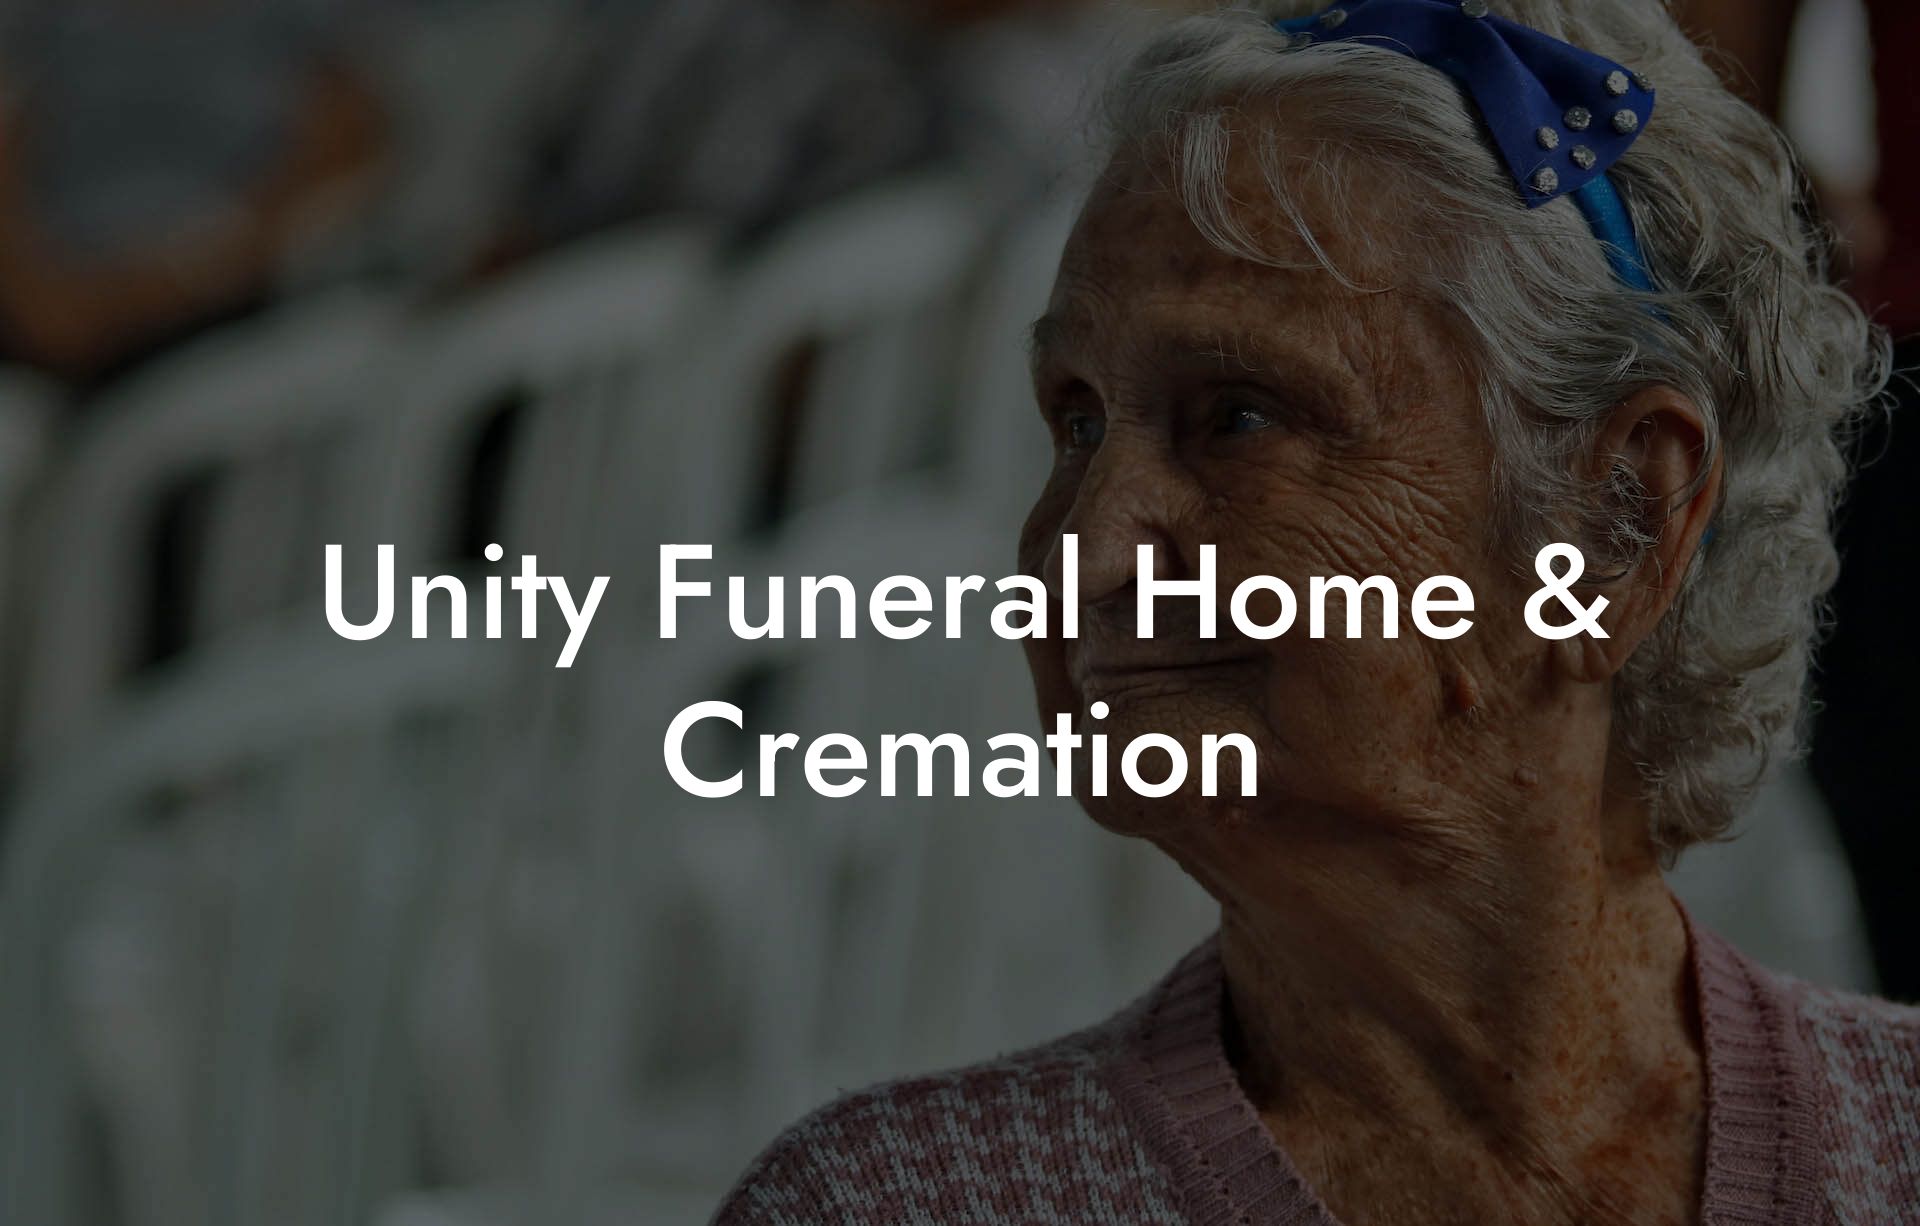 Unity Funeral Home & Cremation